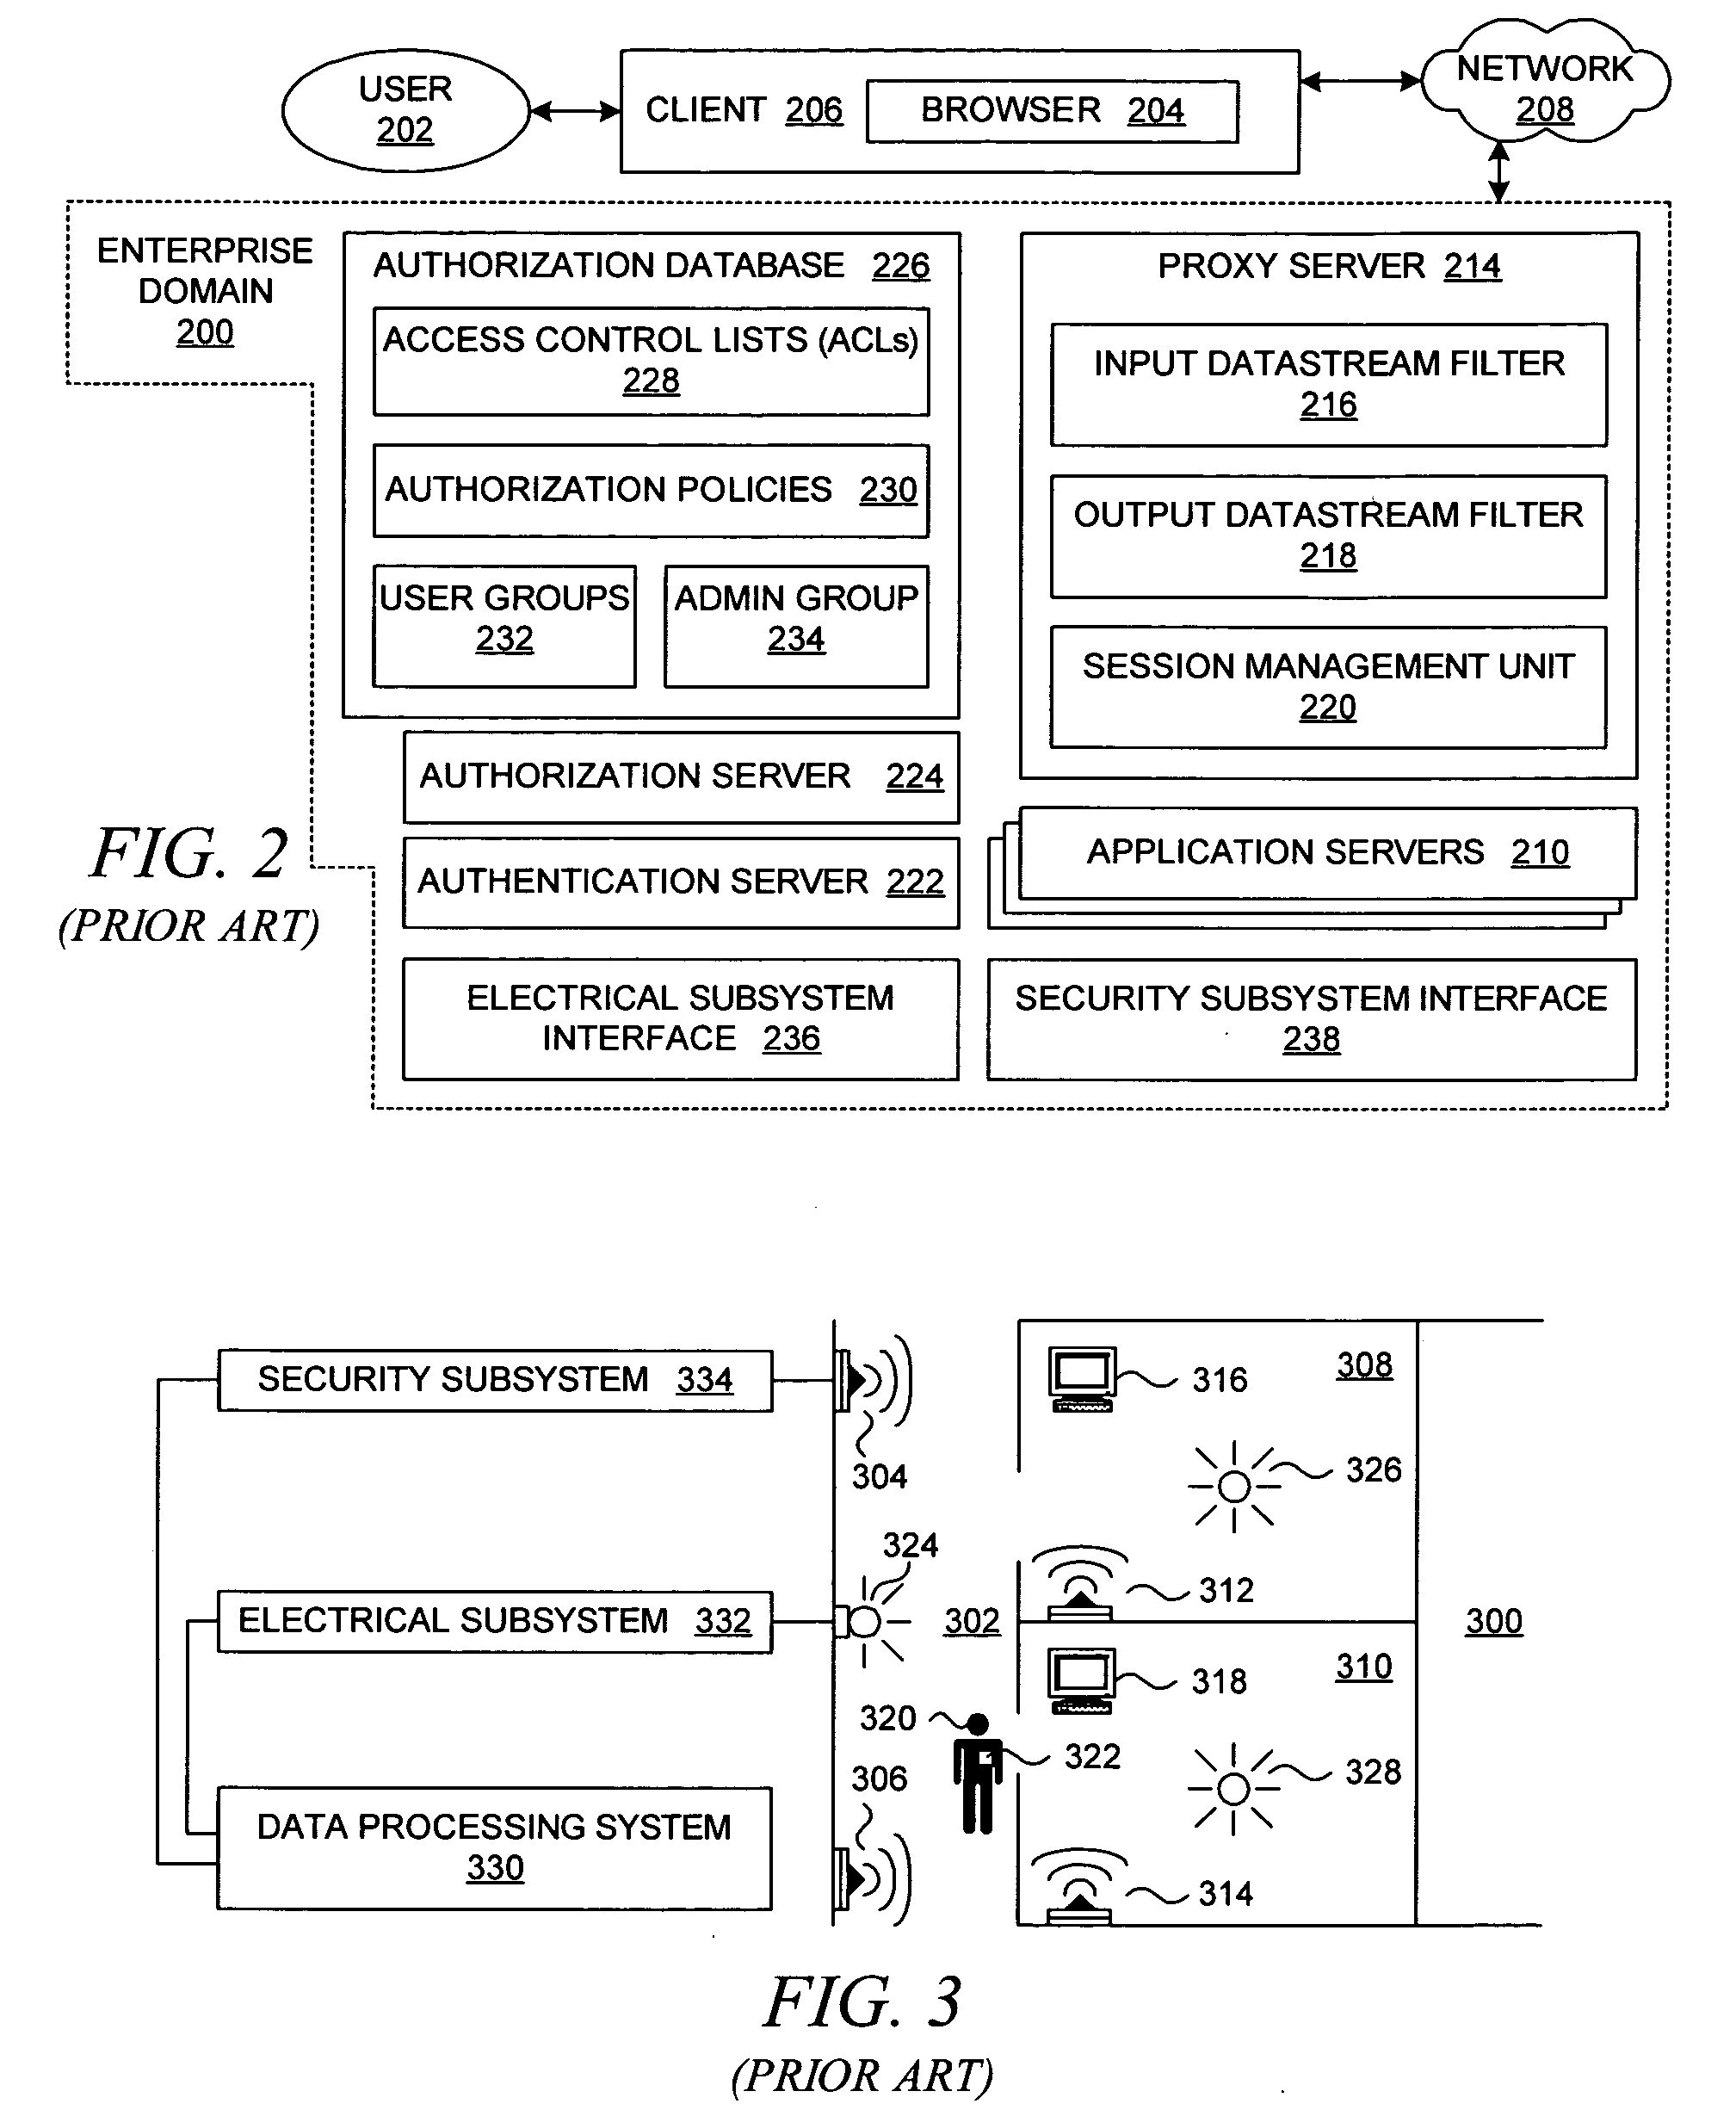 Method and system for dynamic adjustment of computer security based on personal proximity